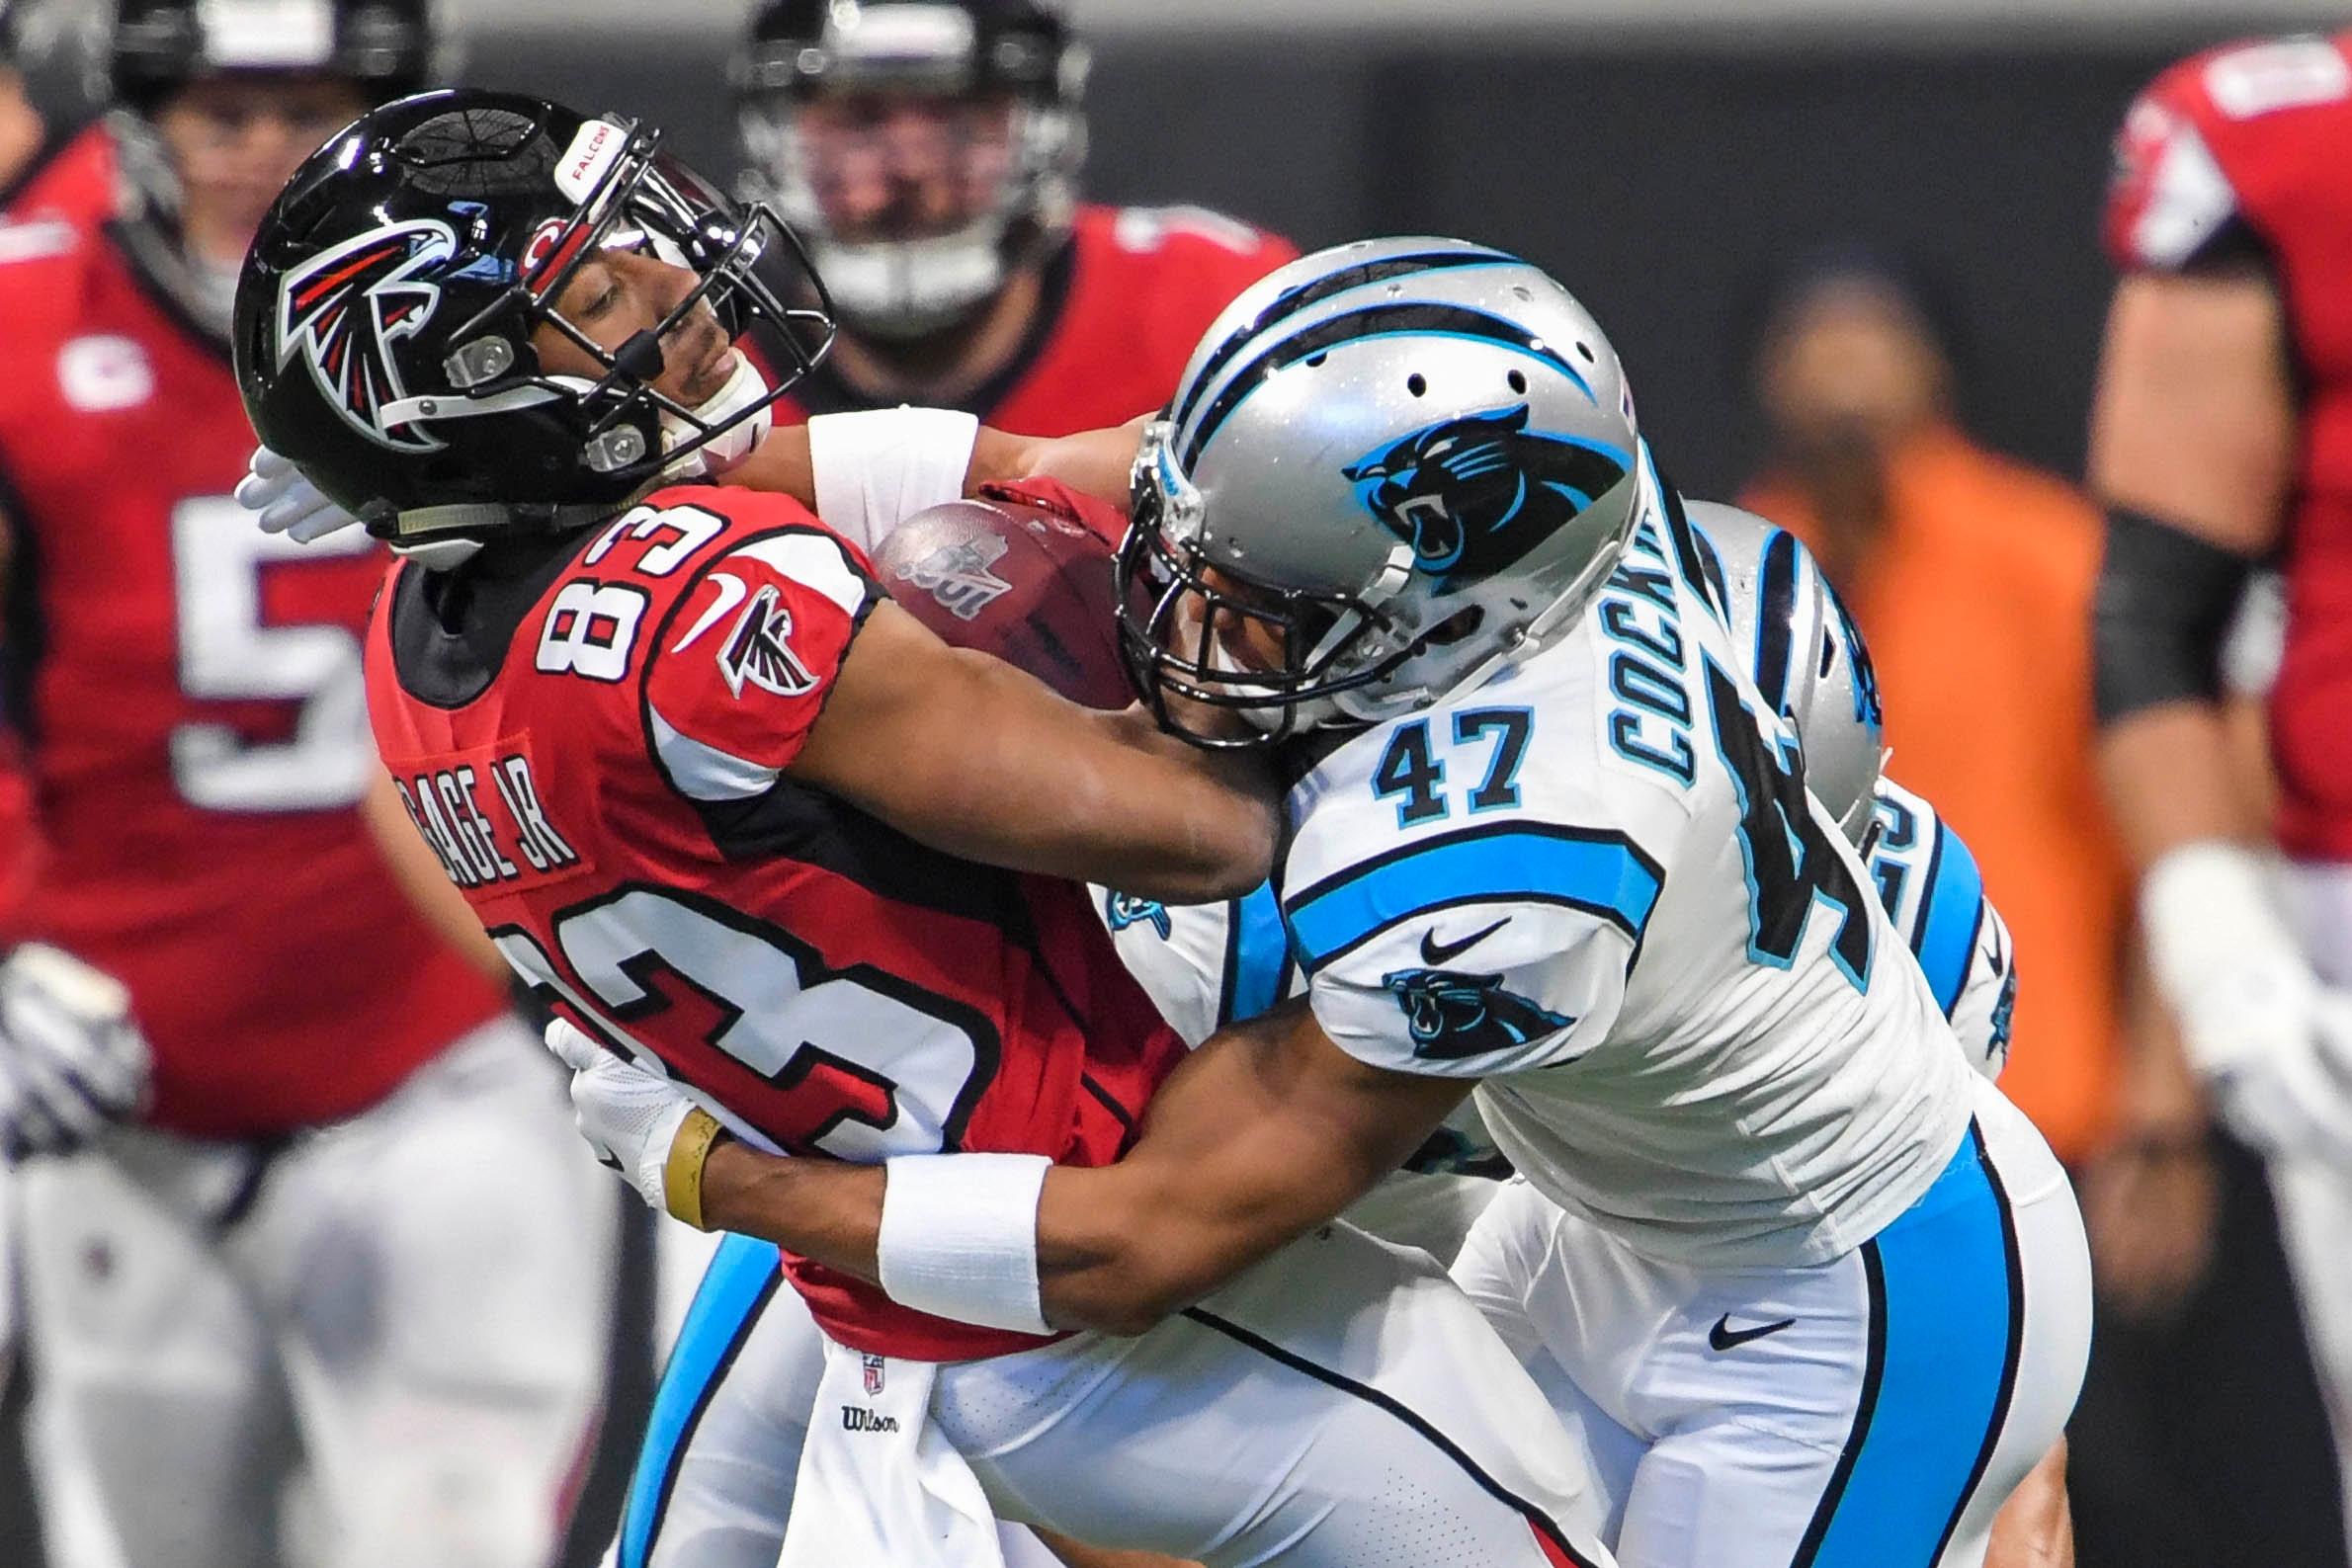 Dec 8, 2019; Atlanta, GA, USA; Atlanta Falcons wide receiver Russell Gage (83) is tackled by Carolina Panthers defensive back Ross Cockrell (47) during the first half at Mercedes-Benz Stadium. / Dale Zanine-USA TODAY Sports